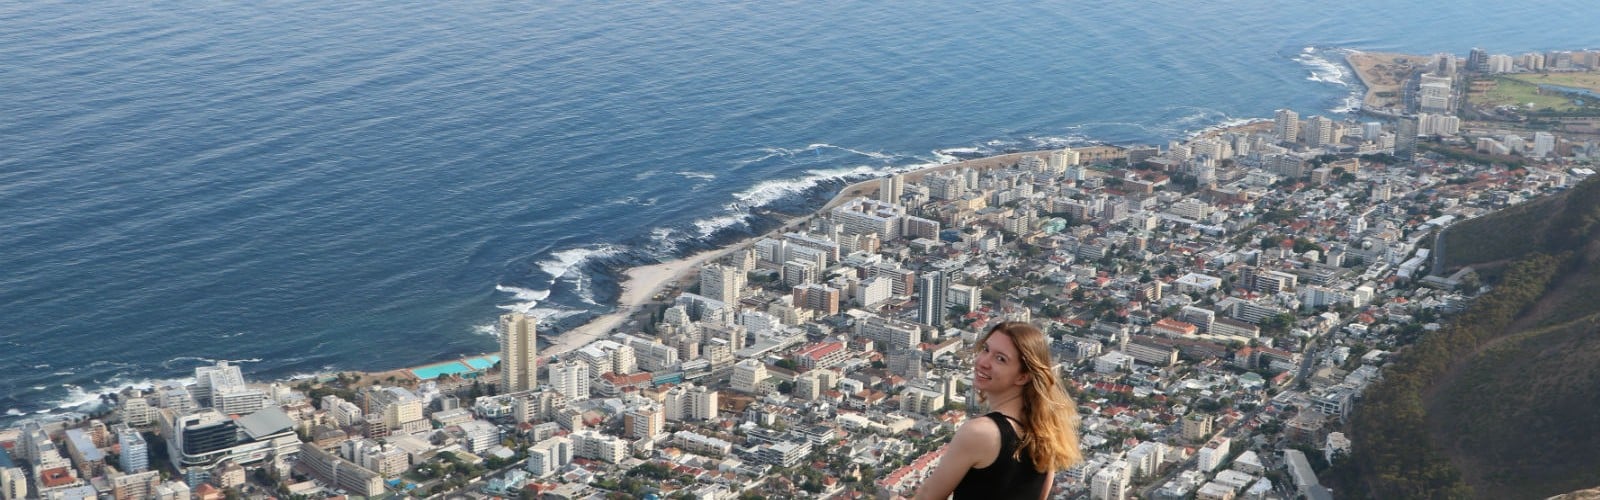 Meet our Interns: Reflections of Chiara, an intern in Cape Town